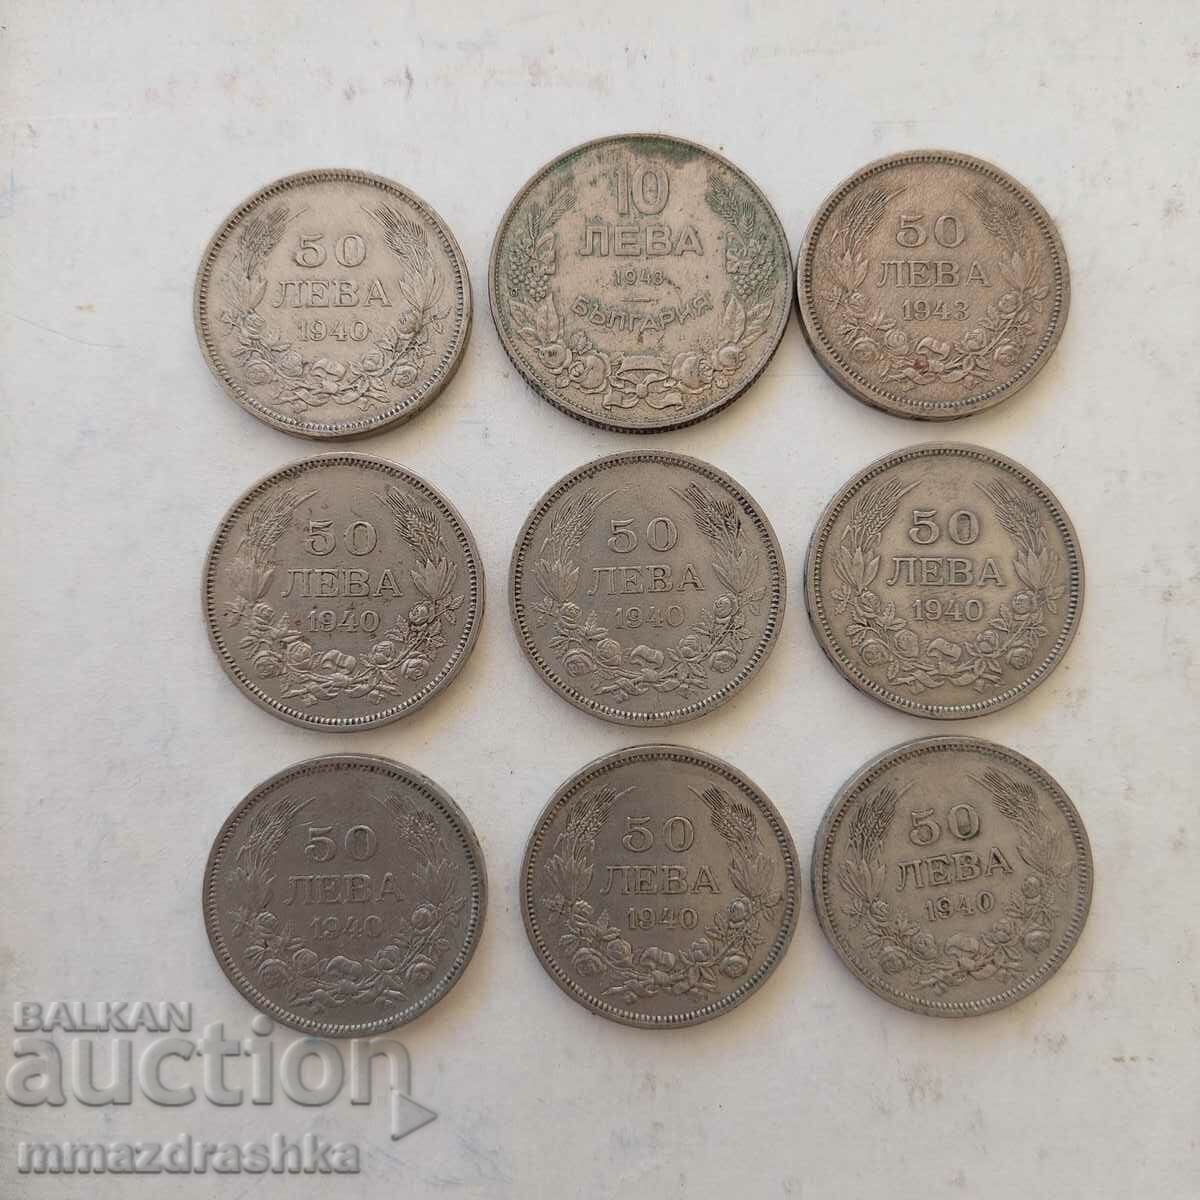 Coins from the time of tsars